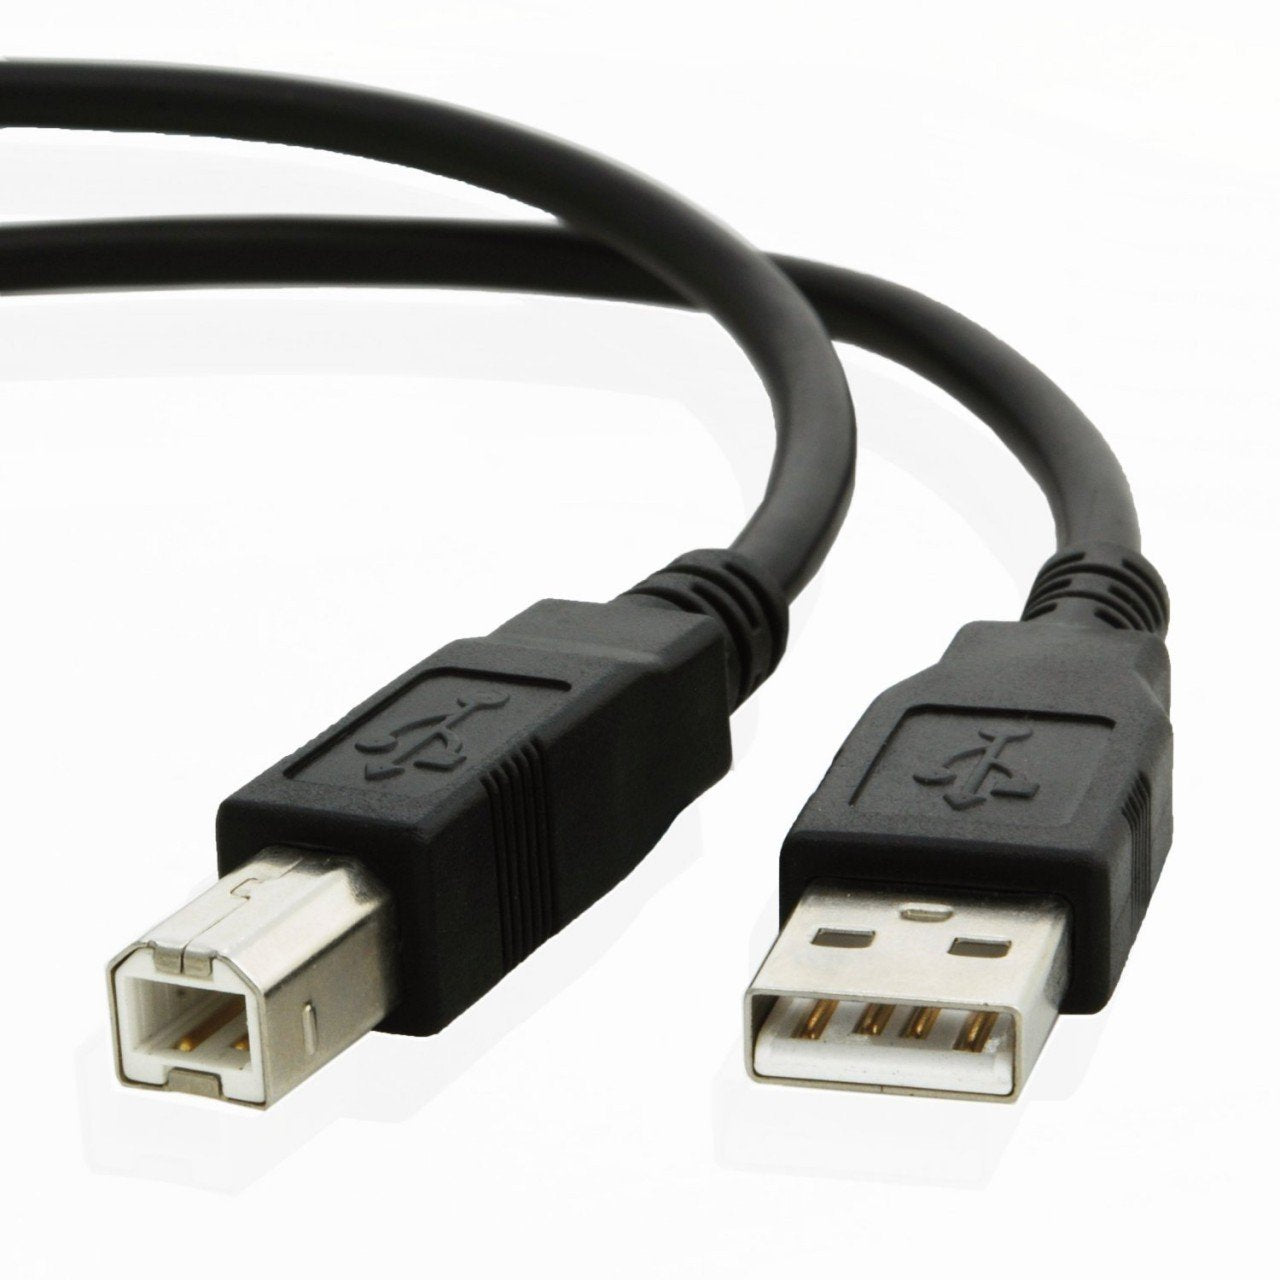 USB cable for Hp ENVY 7134